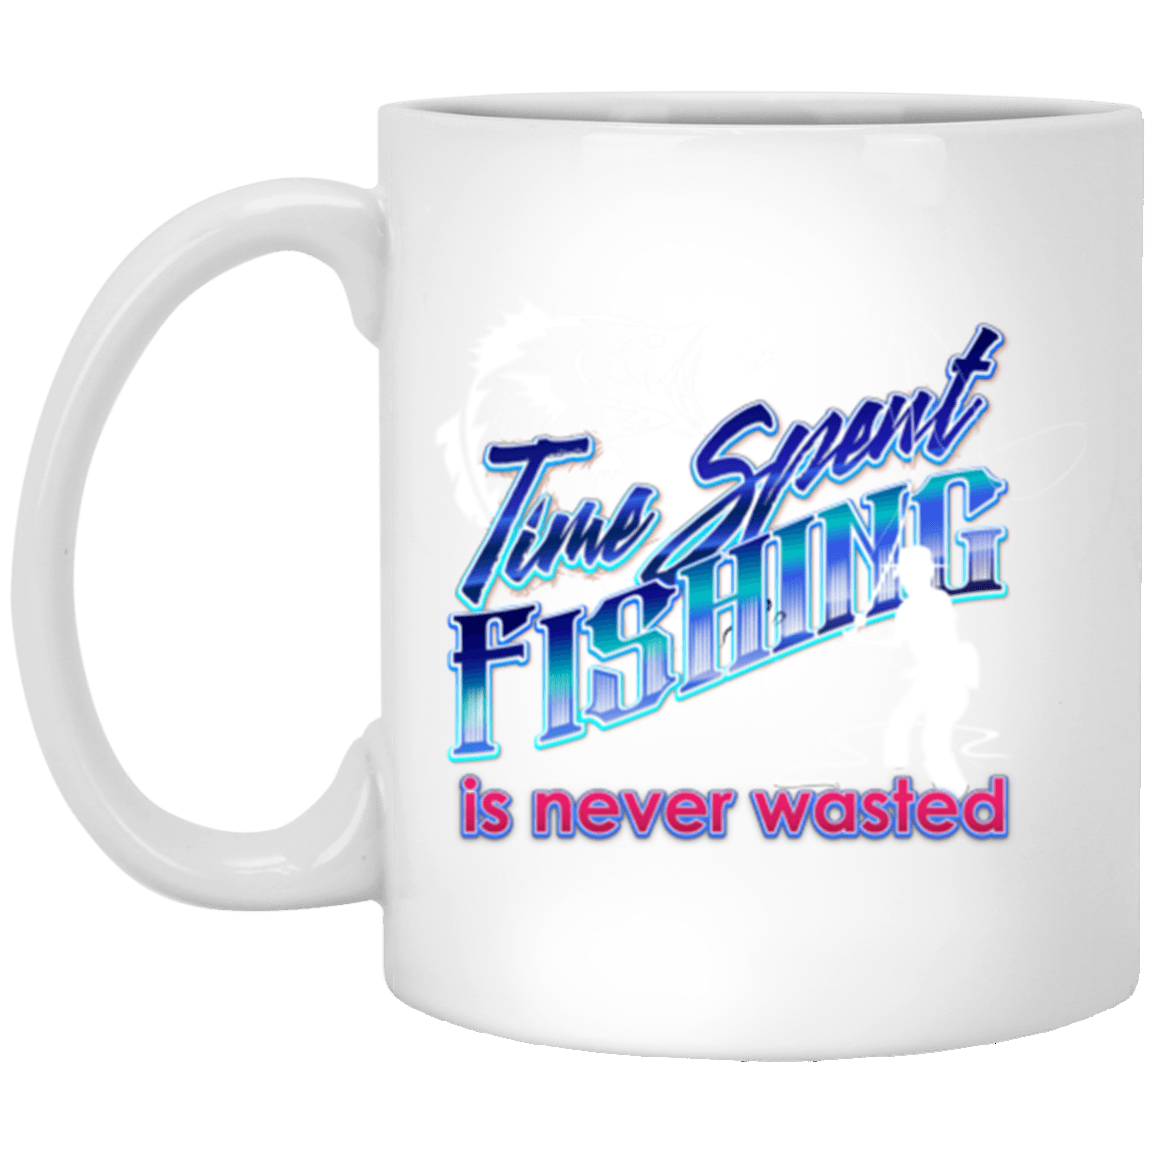 time-spent-fishing-is-never-wasted-a White Mugs